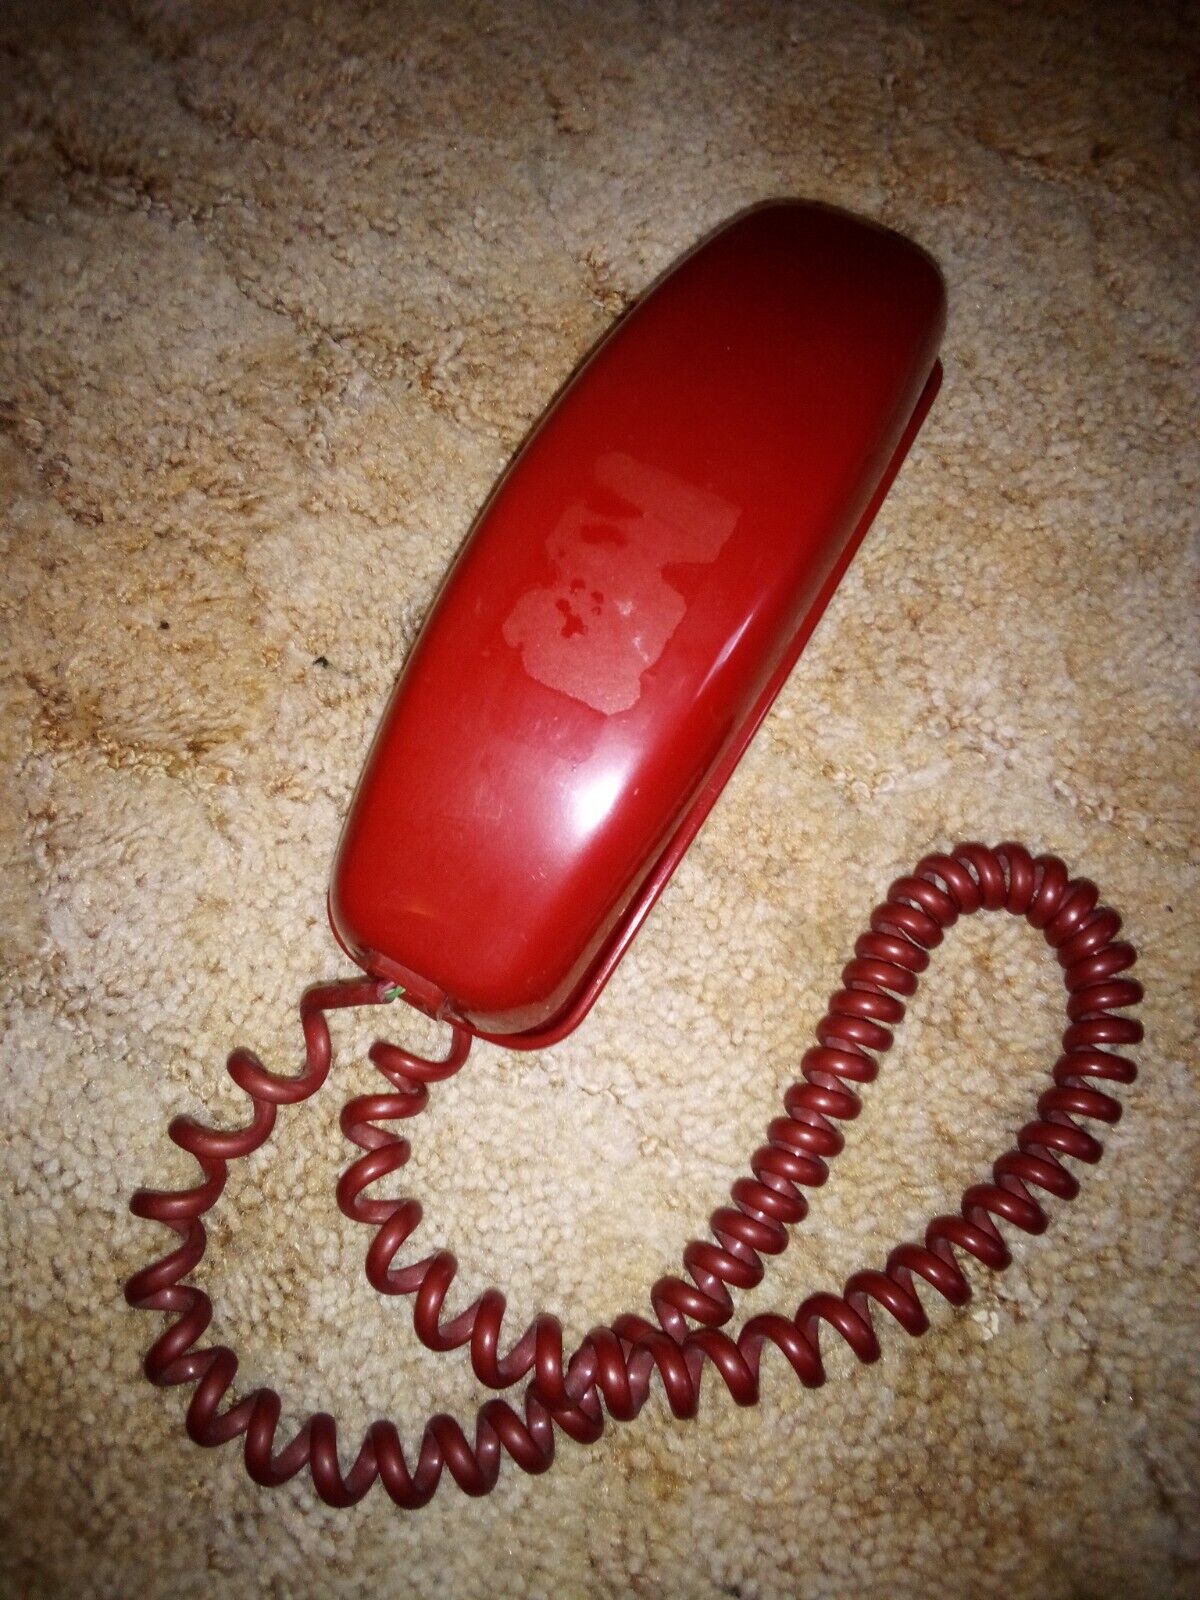 VINTAGE WESTERN Electric Trimline ROTARY Phone red MAROON VG CONDITION